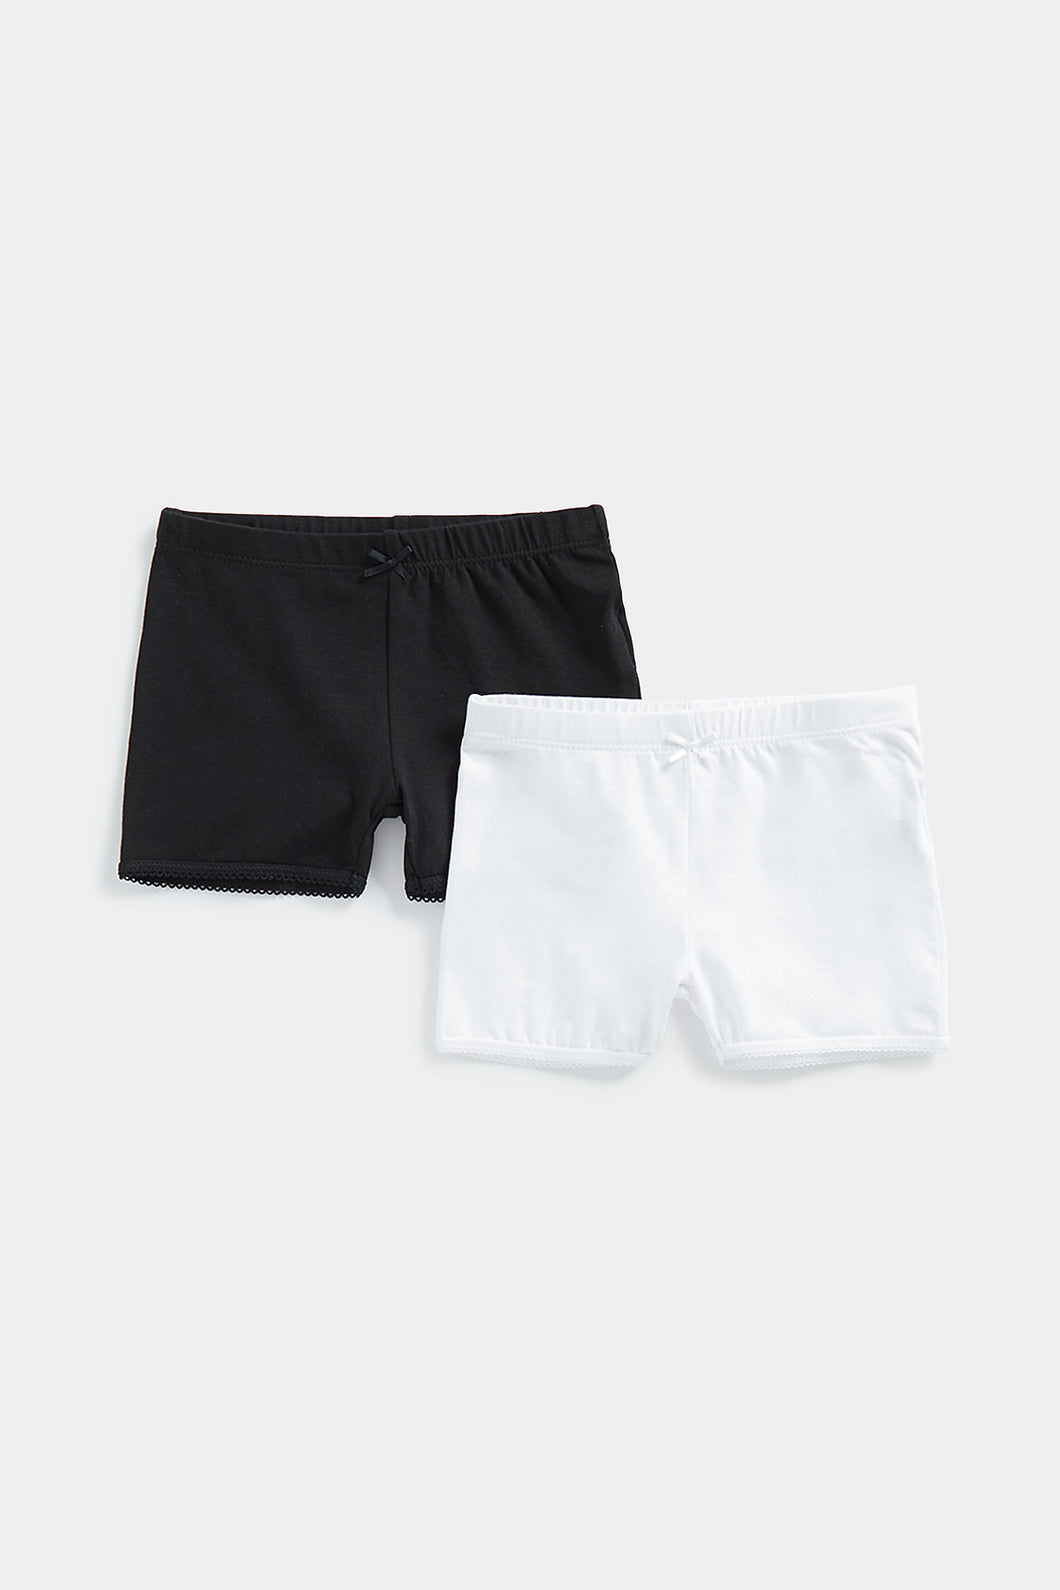 Mothercare Black And White Shorts - 2 Pack